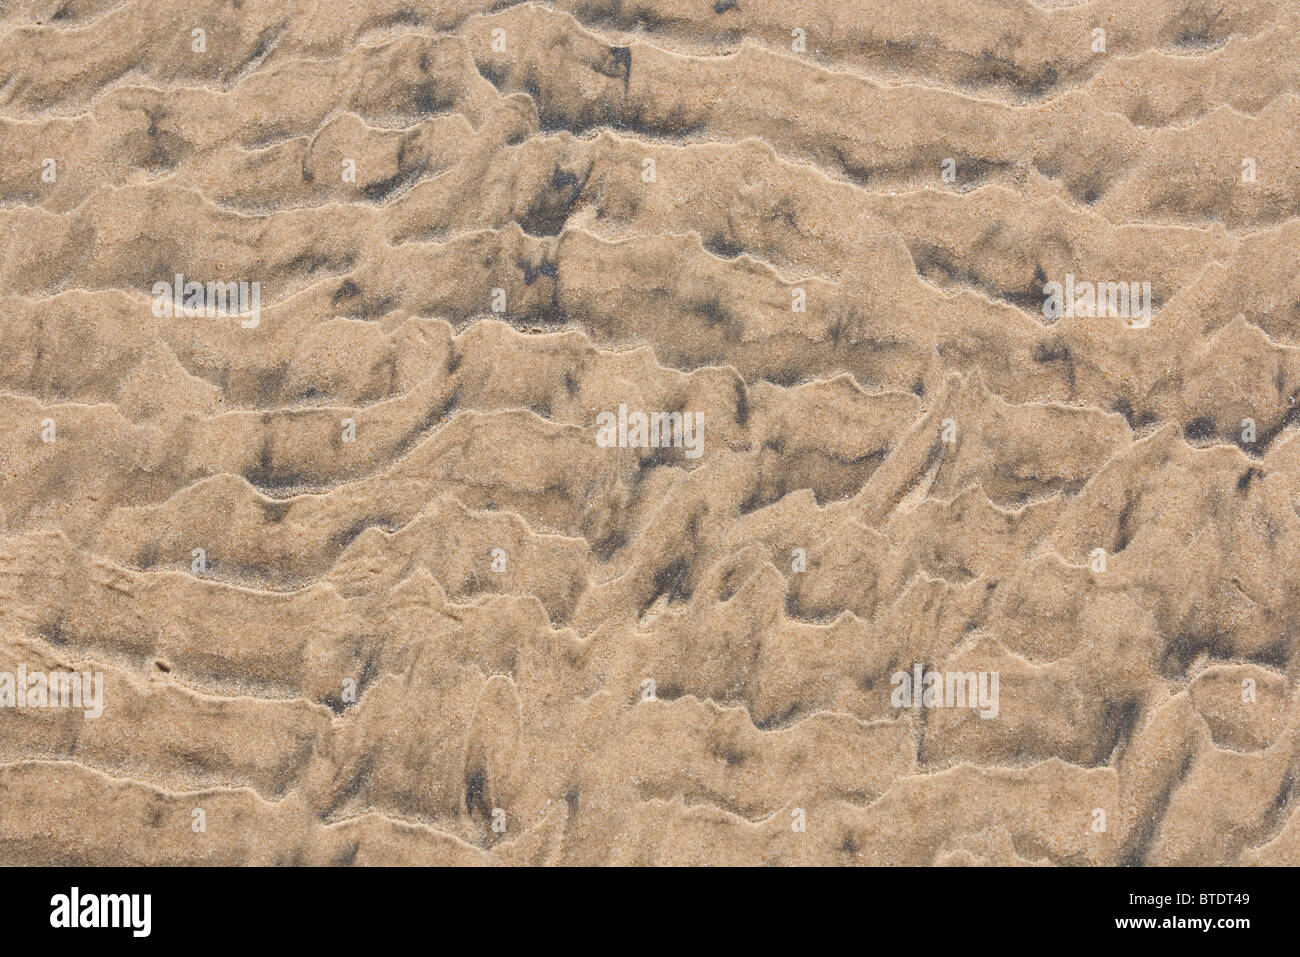 Patterns in beach sand Stock Photo